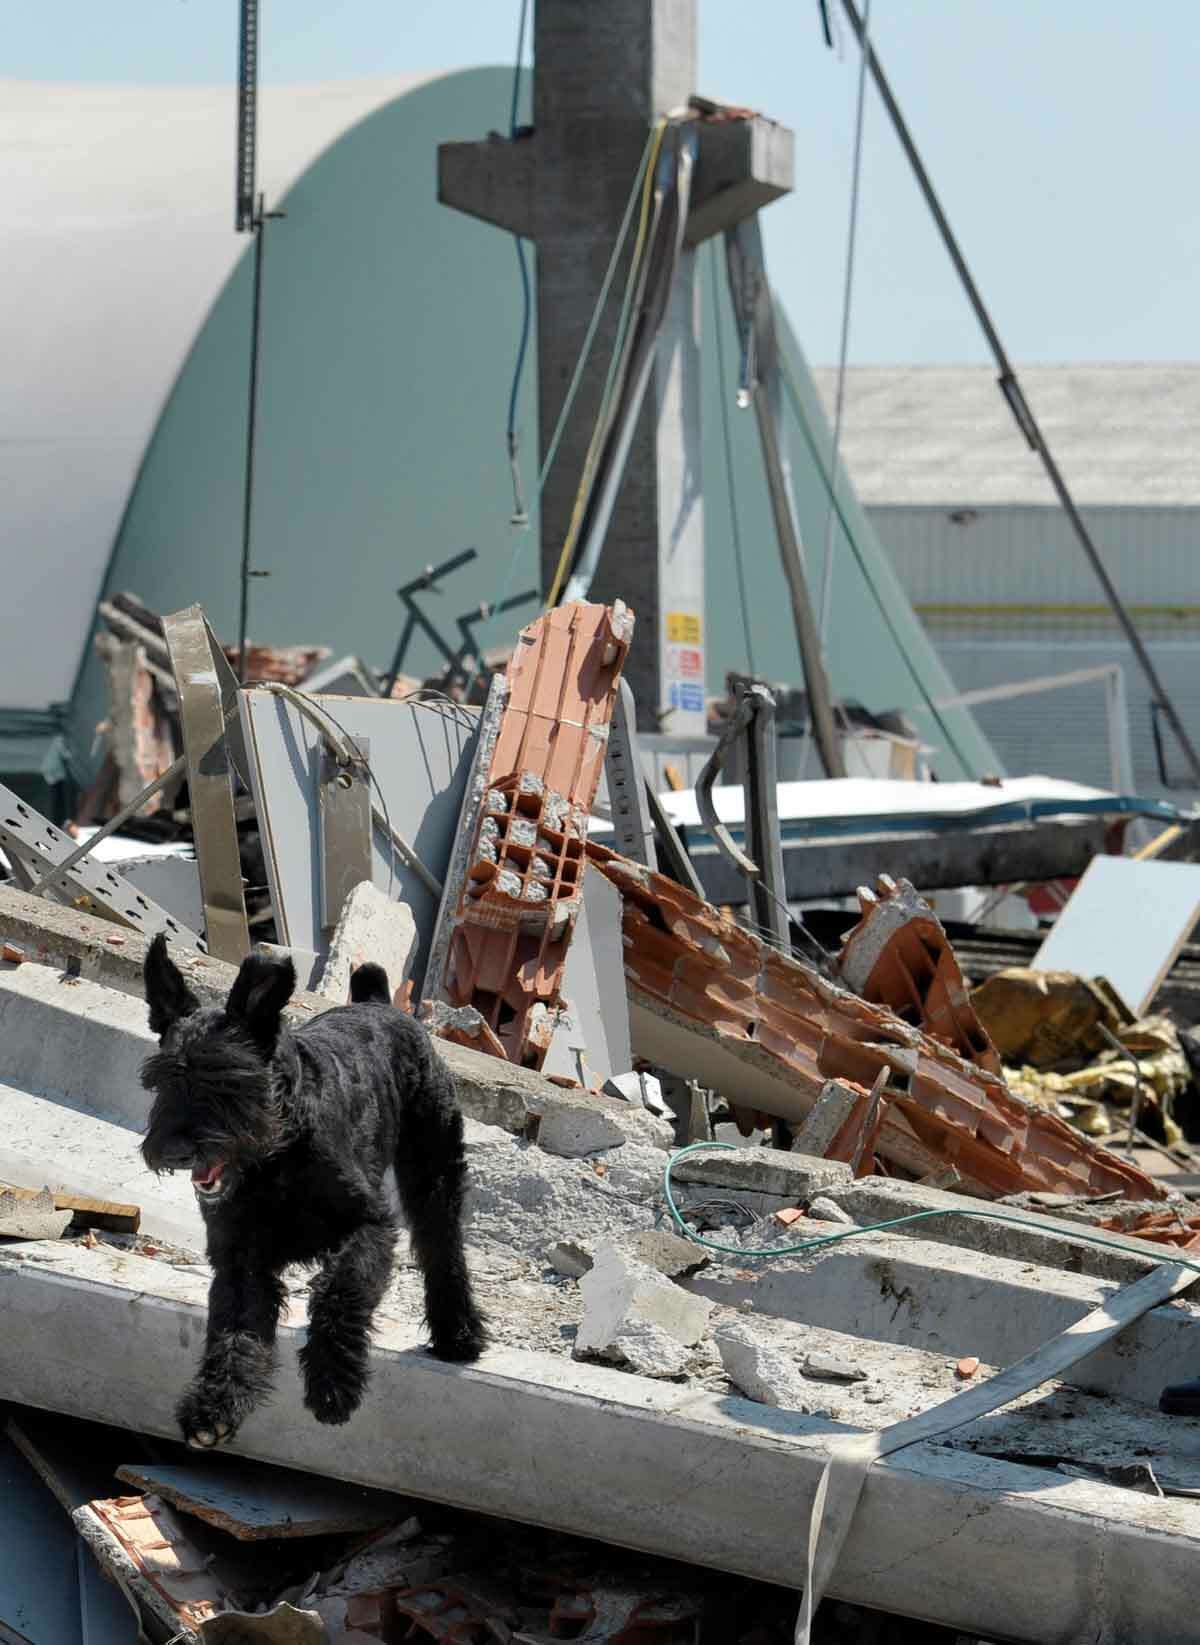 A dog walks amid debris of a collapsed factory in Mirandola, northern Italy, Tuesday, May 29, 2012. A magnitude 5.8 earthquake struck the same area of northern Italy stricken by another fatal tremor on May 20. (AP Photo/Marco Vasini)